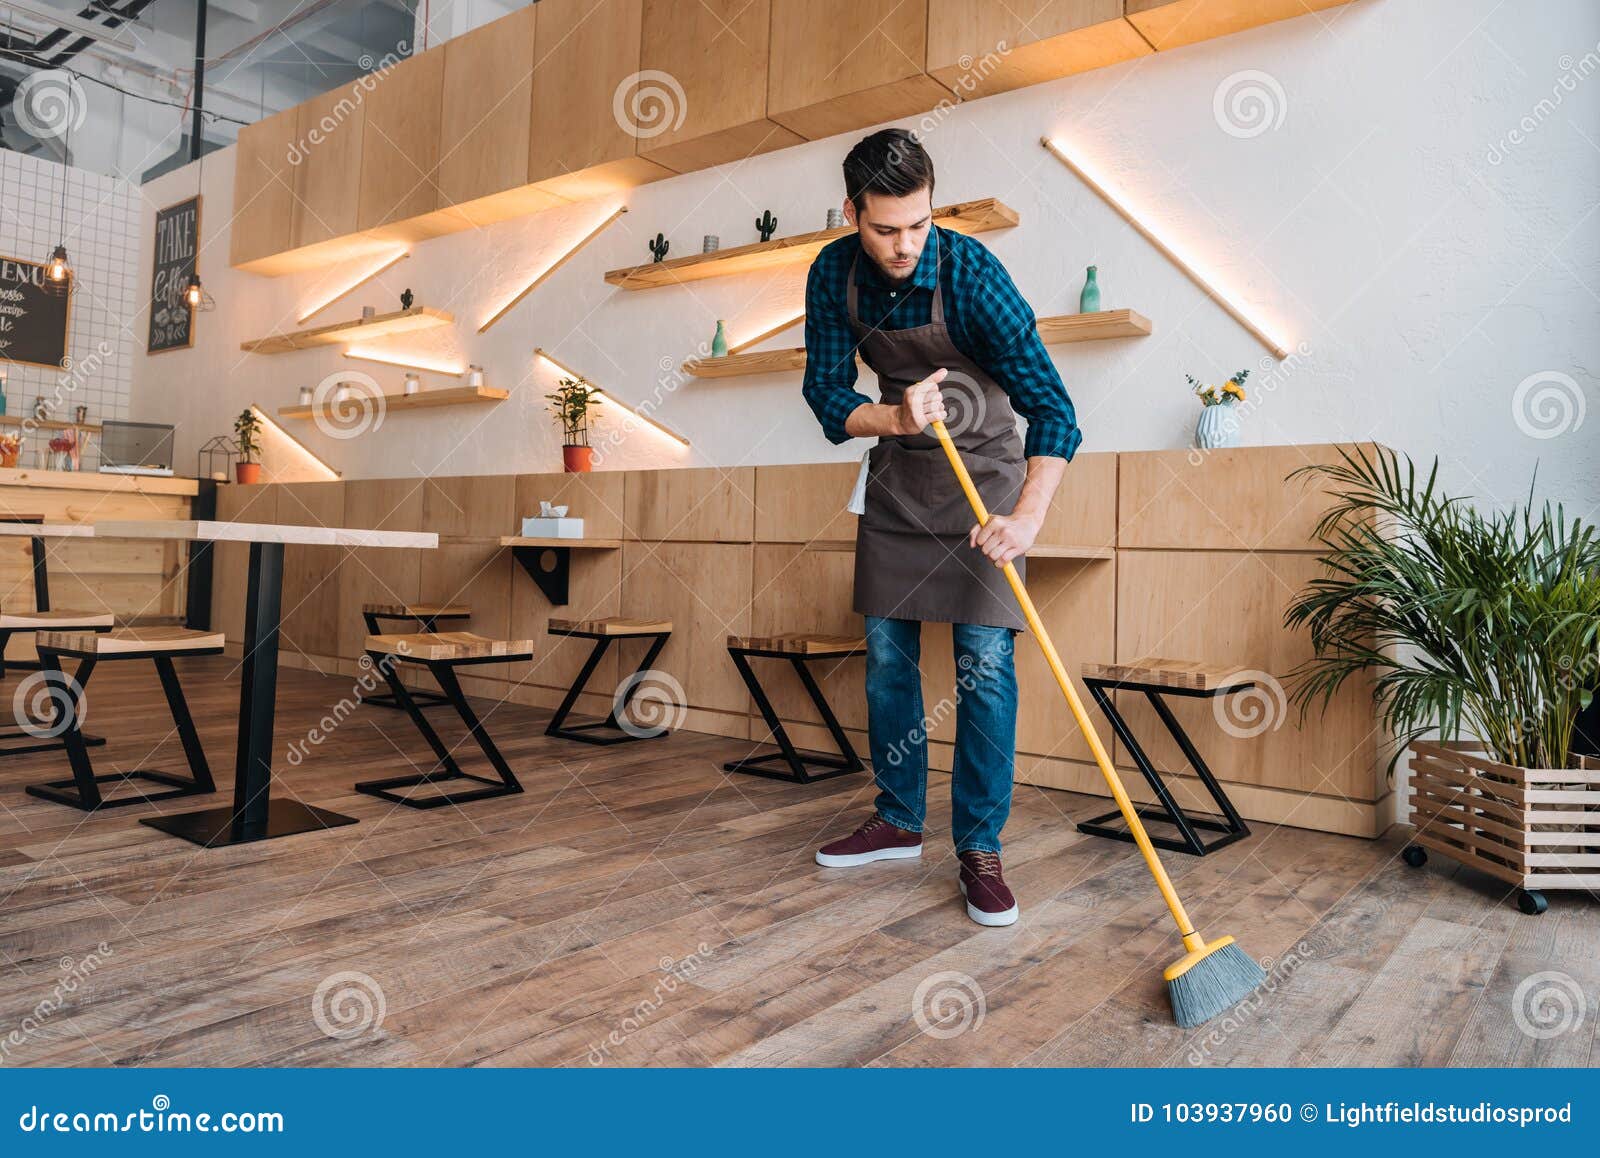 worker cleaning floor with sweep